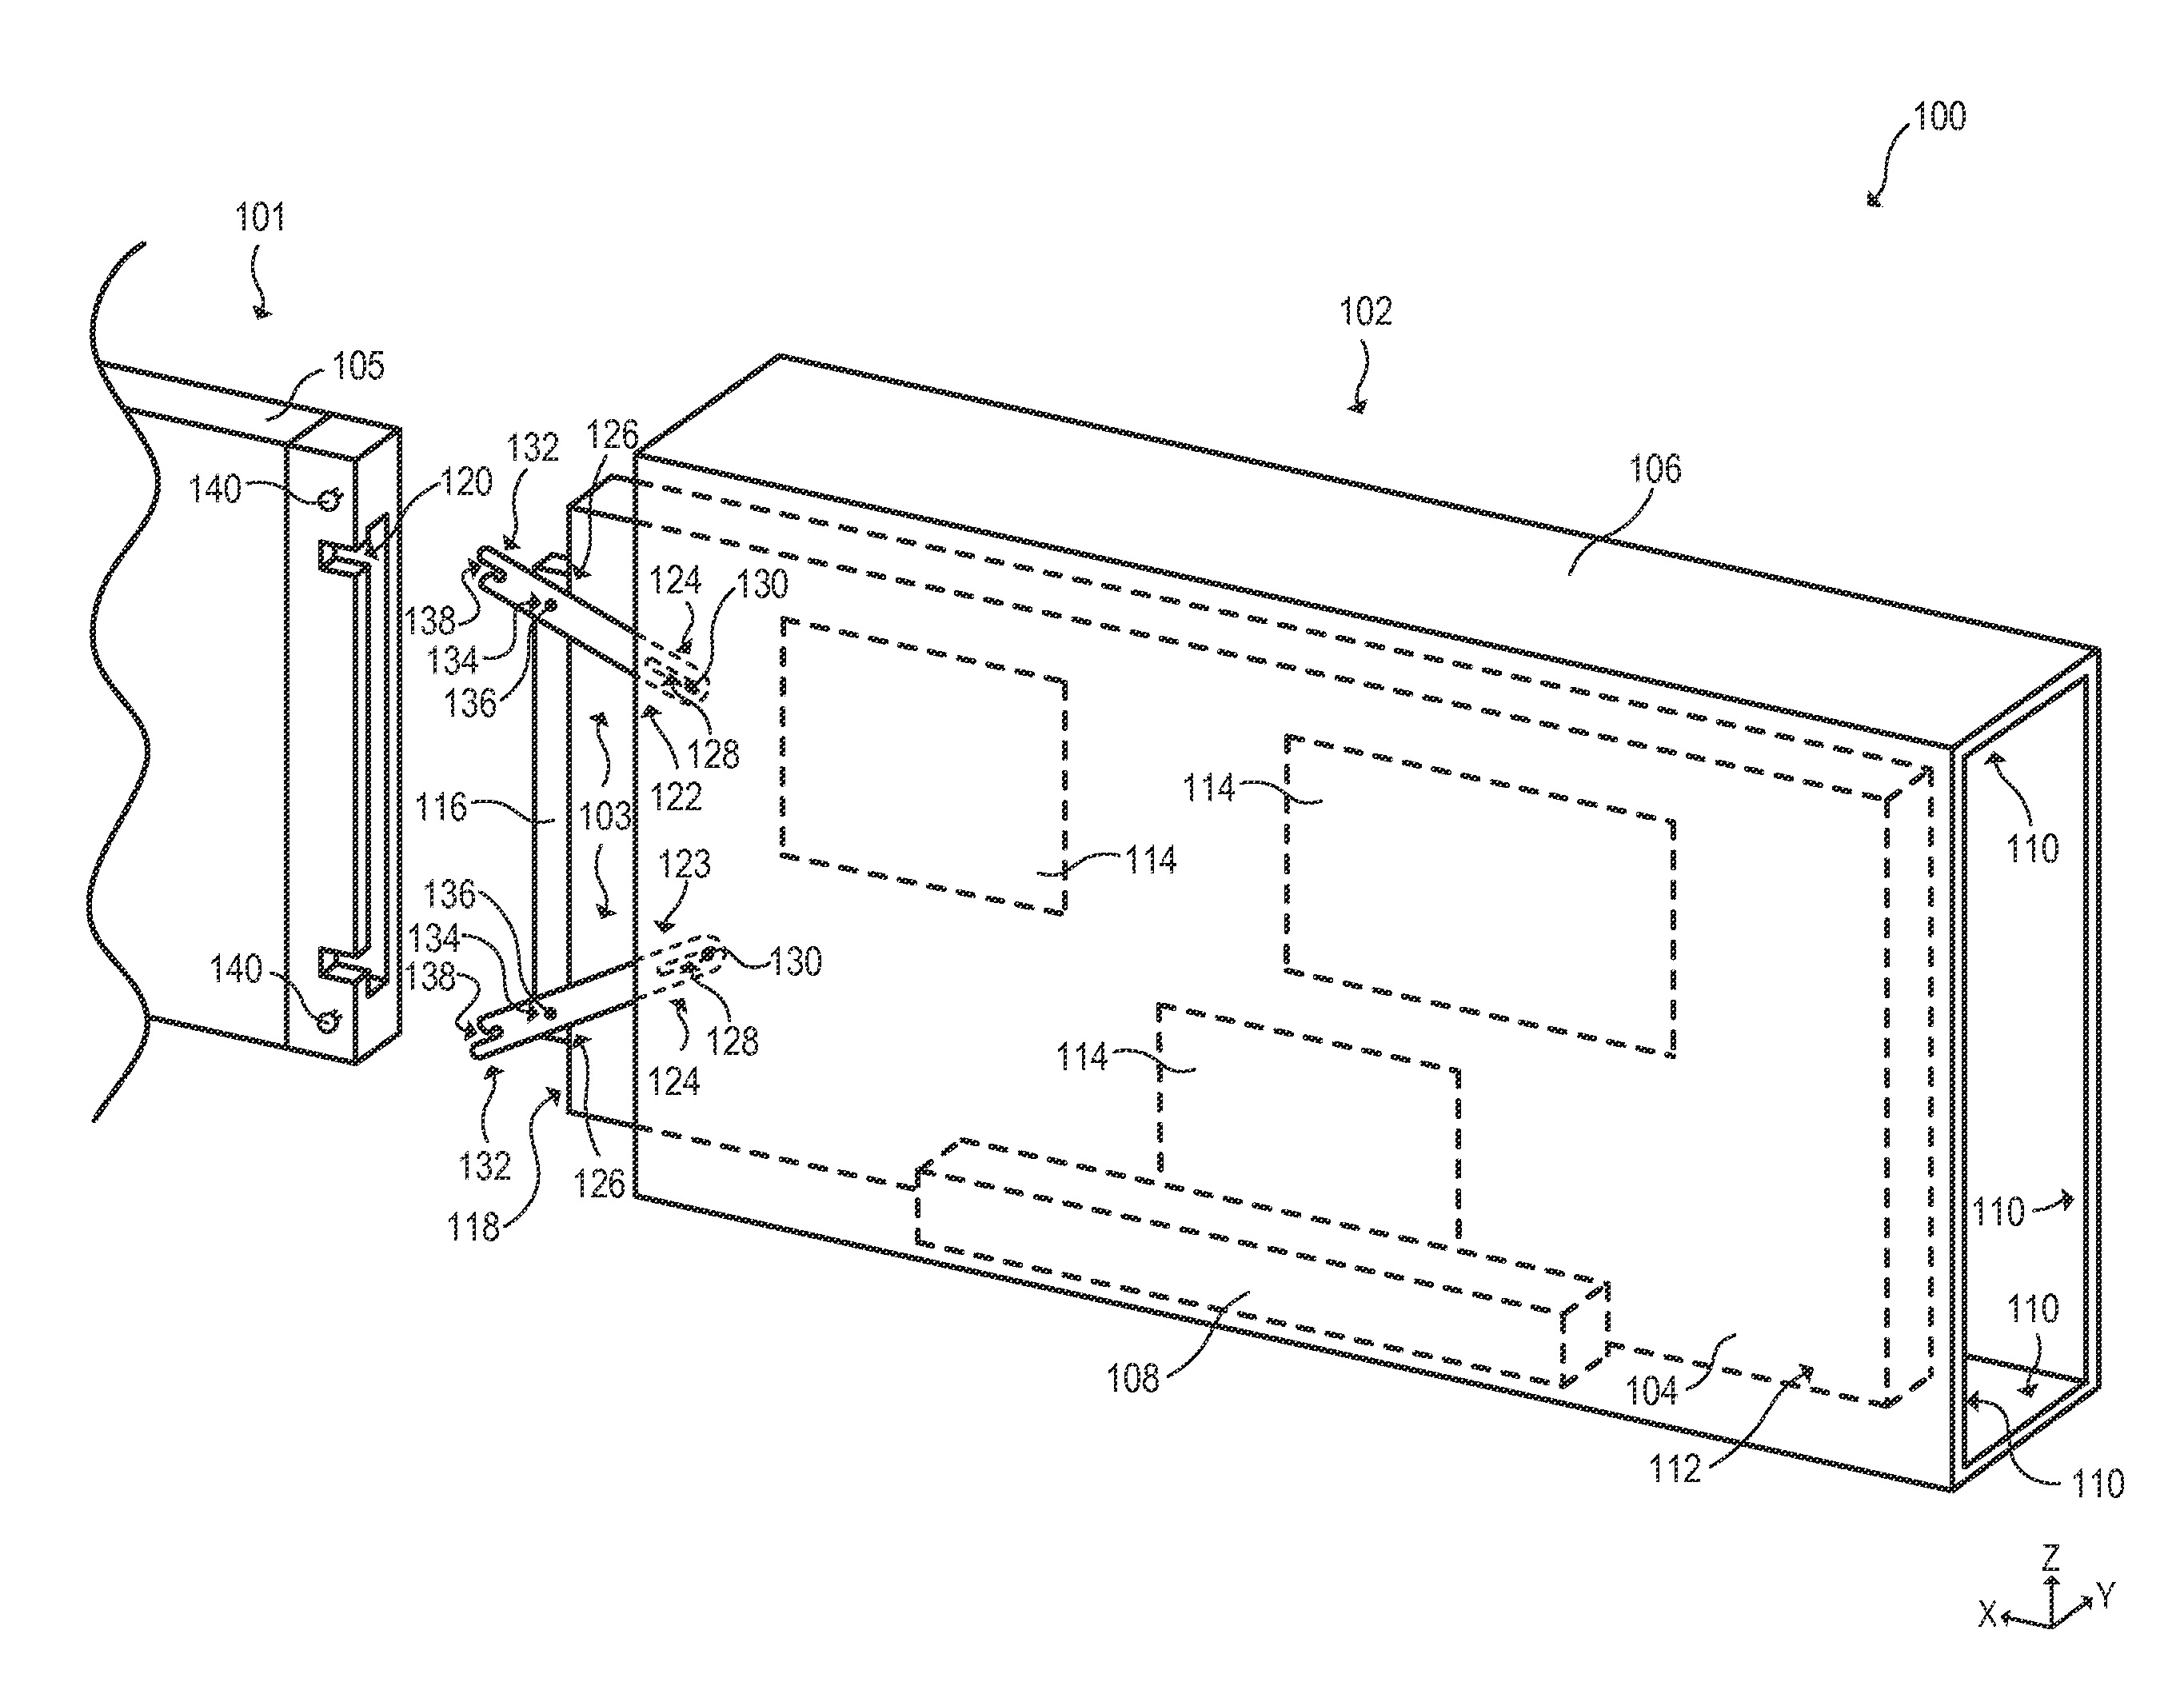 Lever mechanism to facilitate edge coupling of circuit board